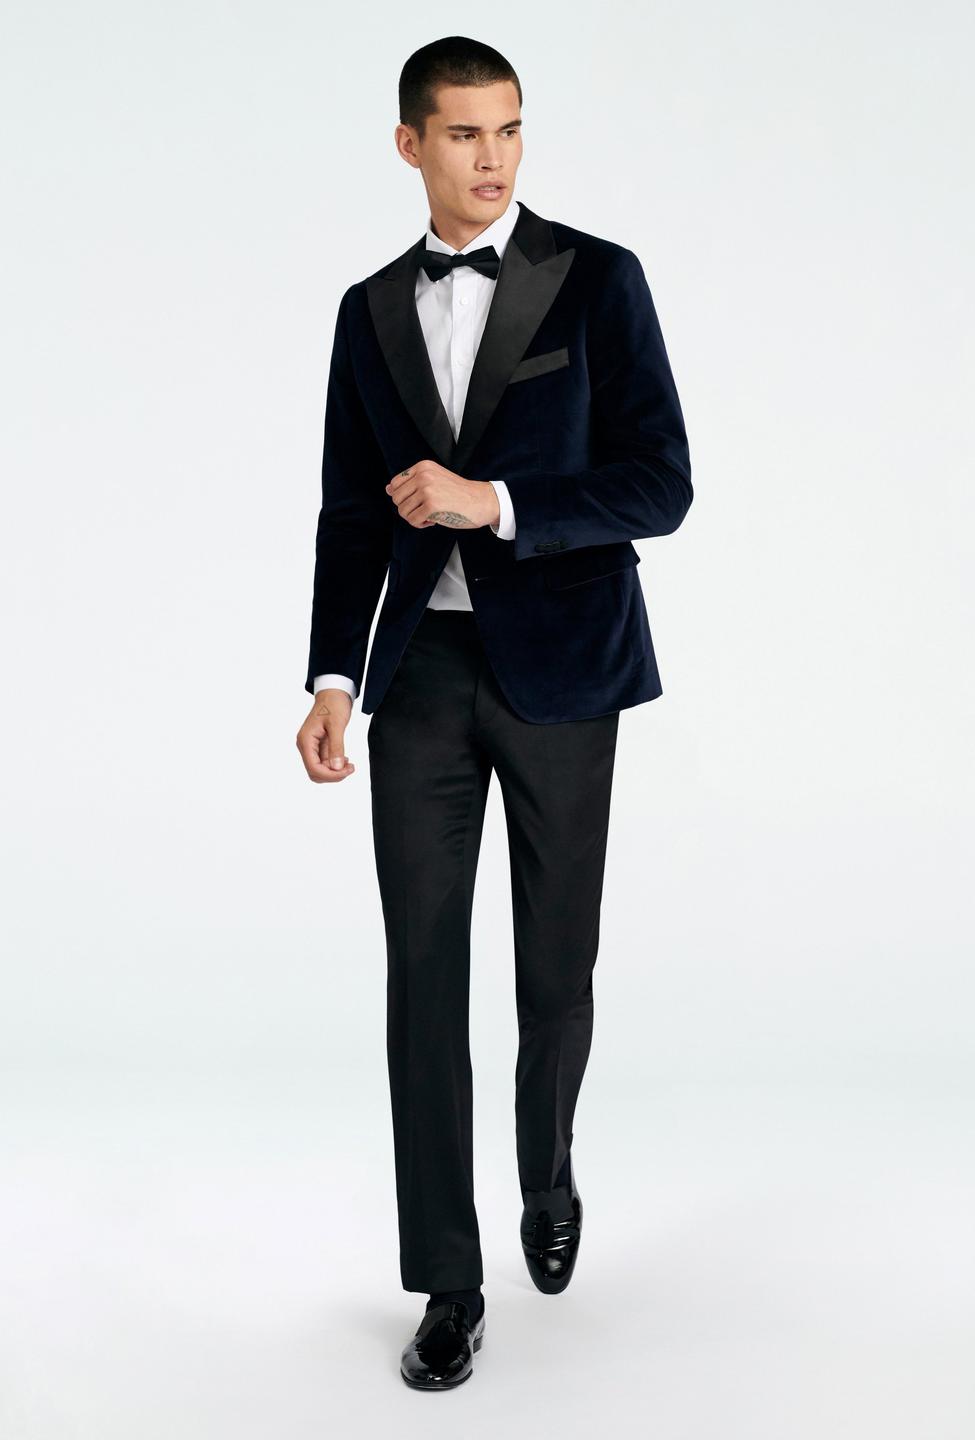 Navy blazer - Hardford Solid Design from Tuxedo Indochino Collection